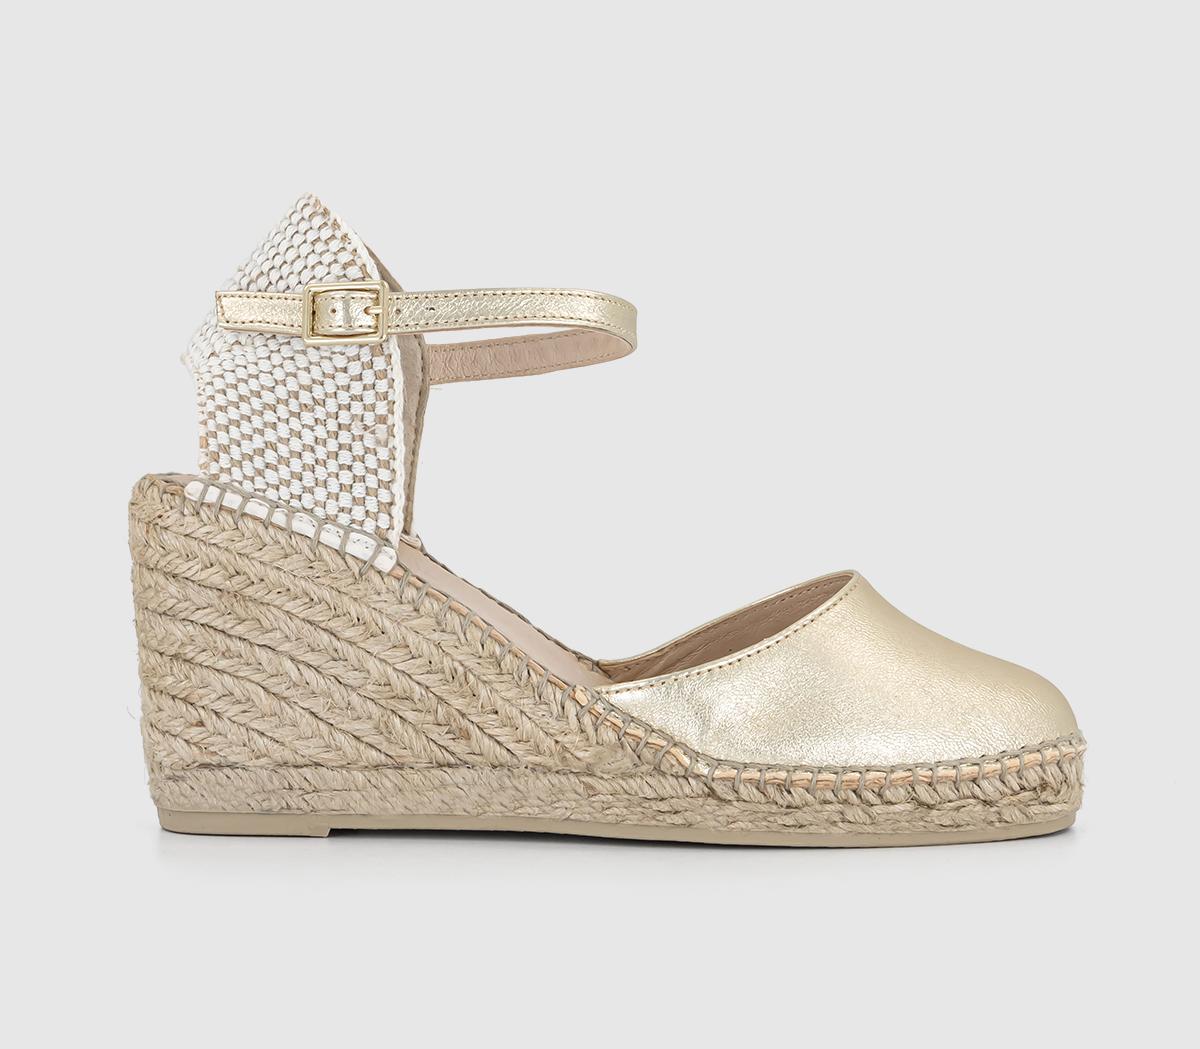 Gaimo for OFFICEAlex Closed Toe Espadrille WedgesGold Leather